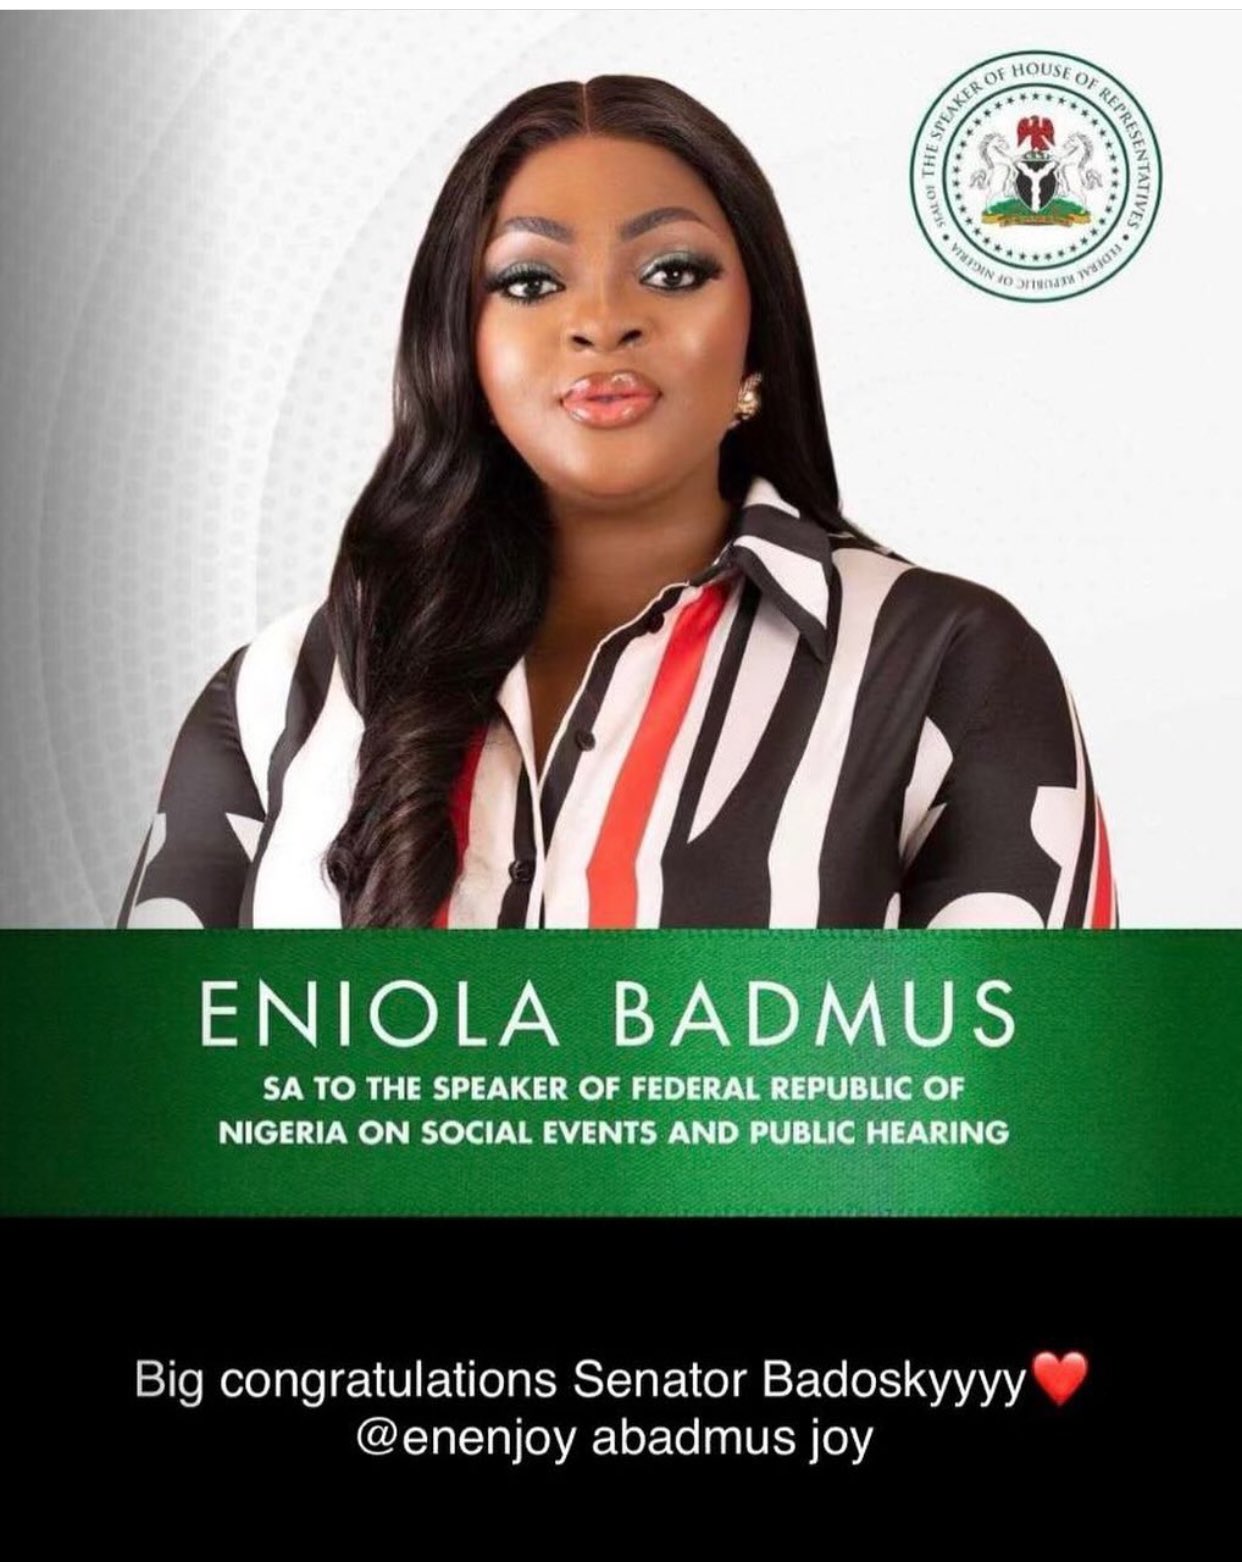 Nollywood actress gets FG appointment